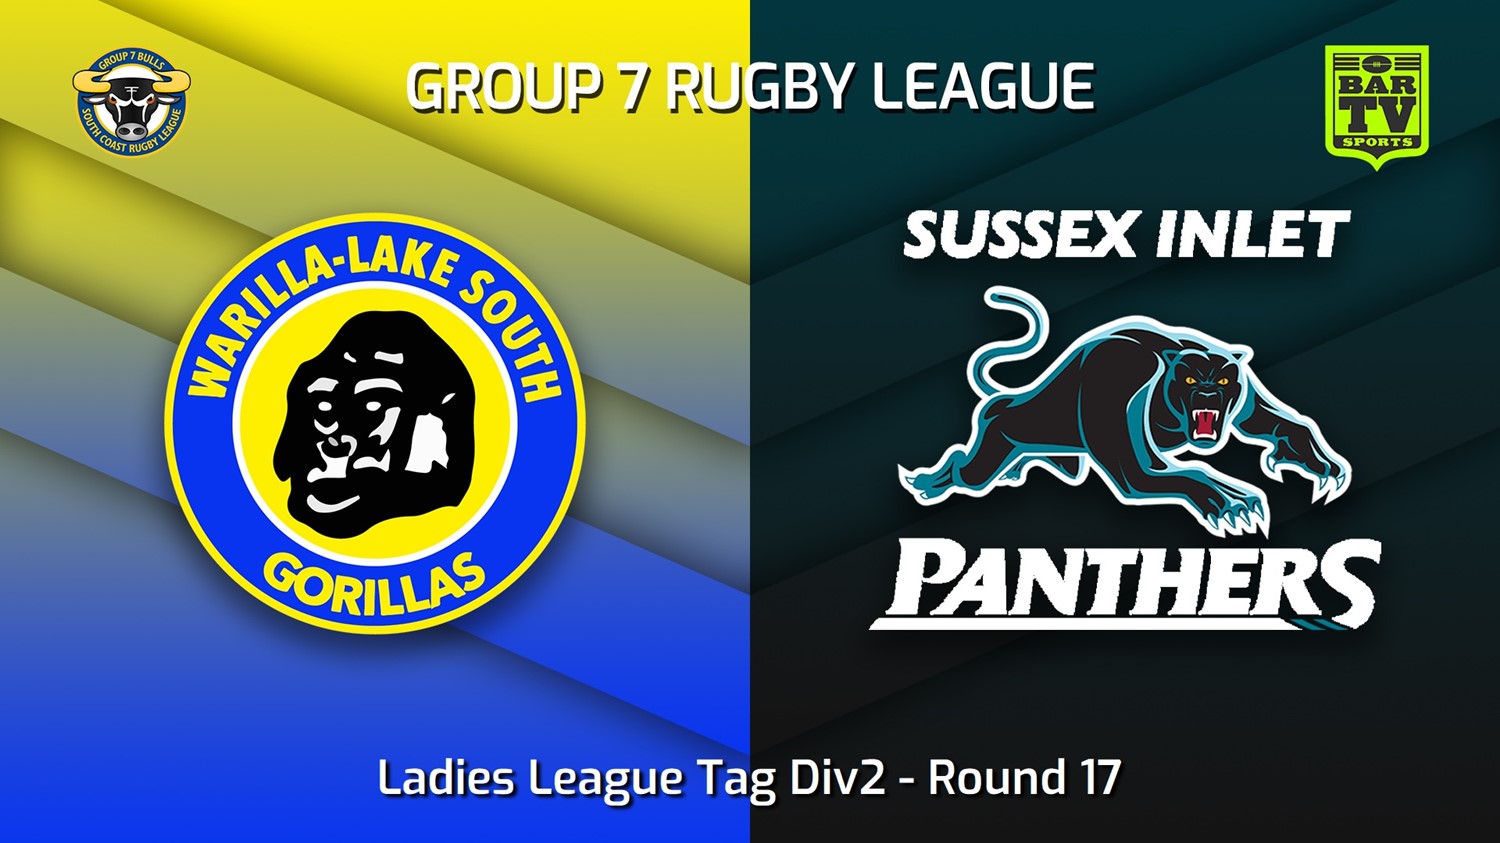 220821-South Coast Round 17 - Ladies League Tag Div2 - Warilla-Lake South Gorillas v Sussex Inlet Panthers Slate Image